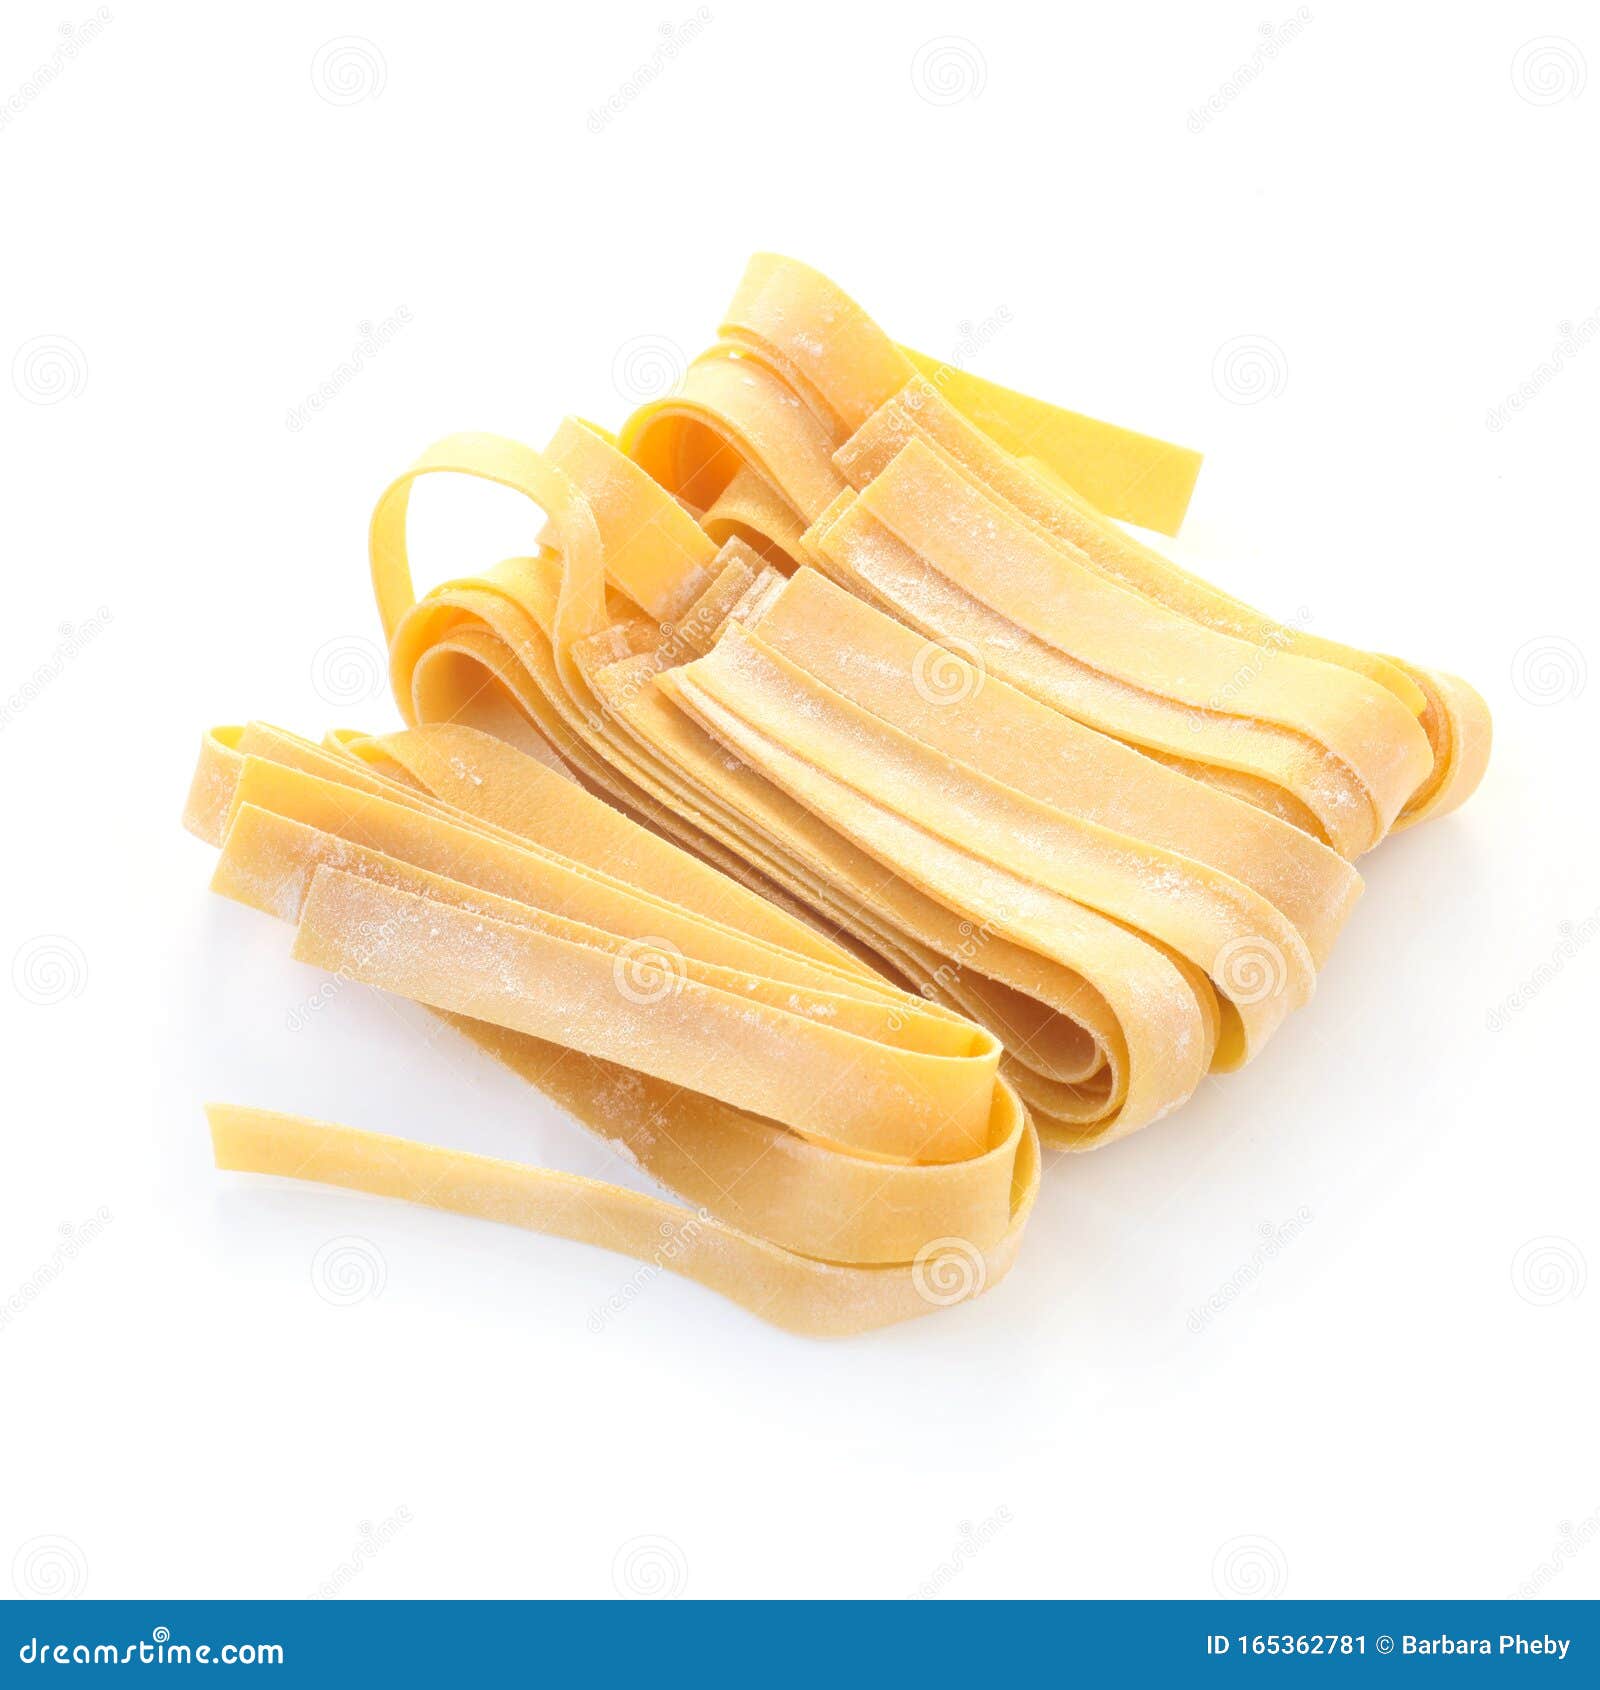 raw pappardelle